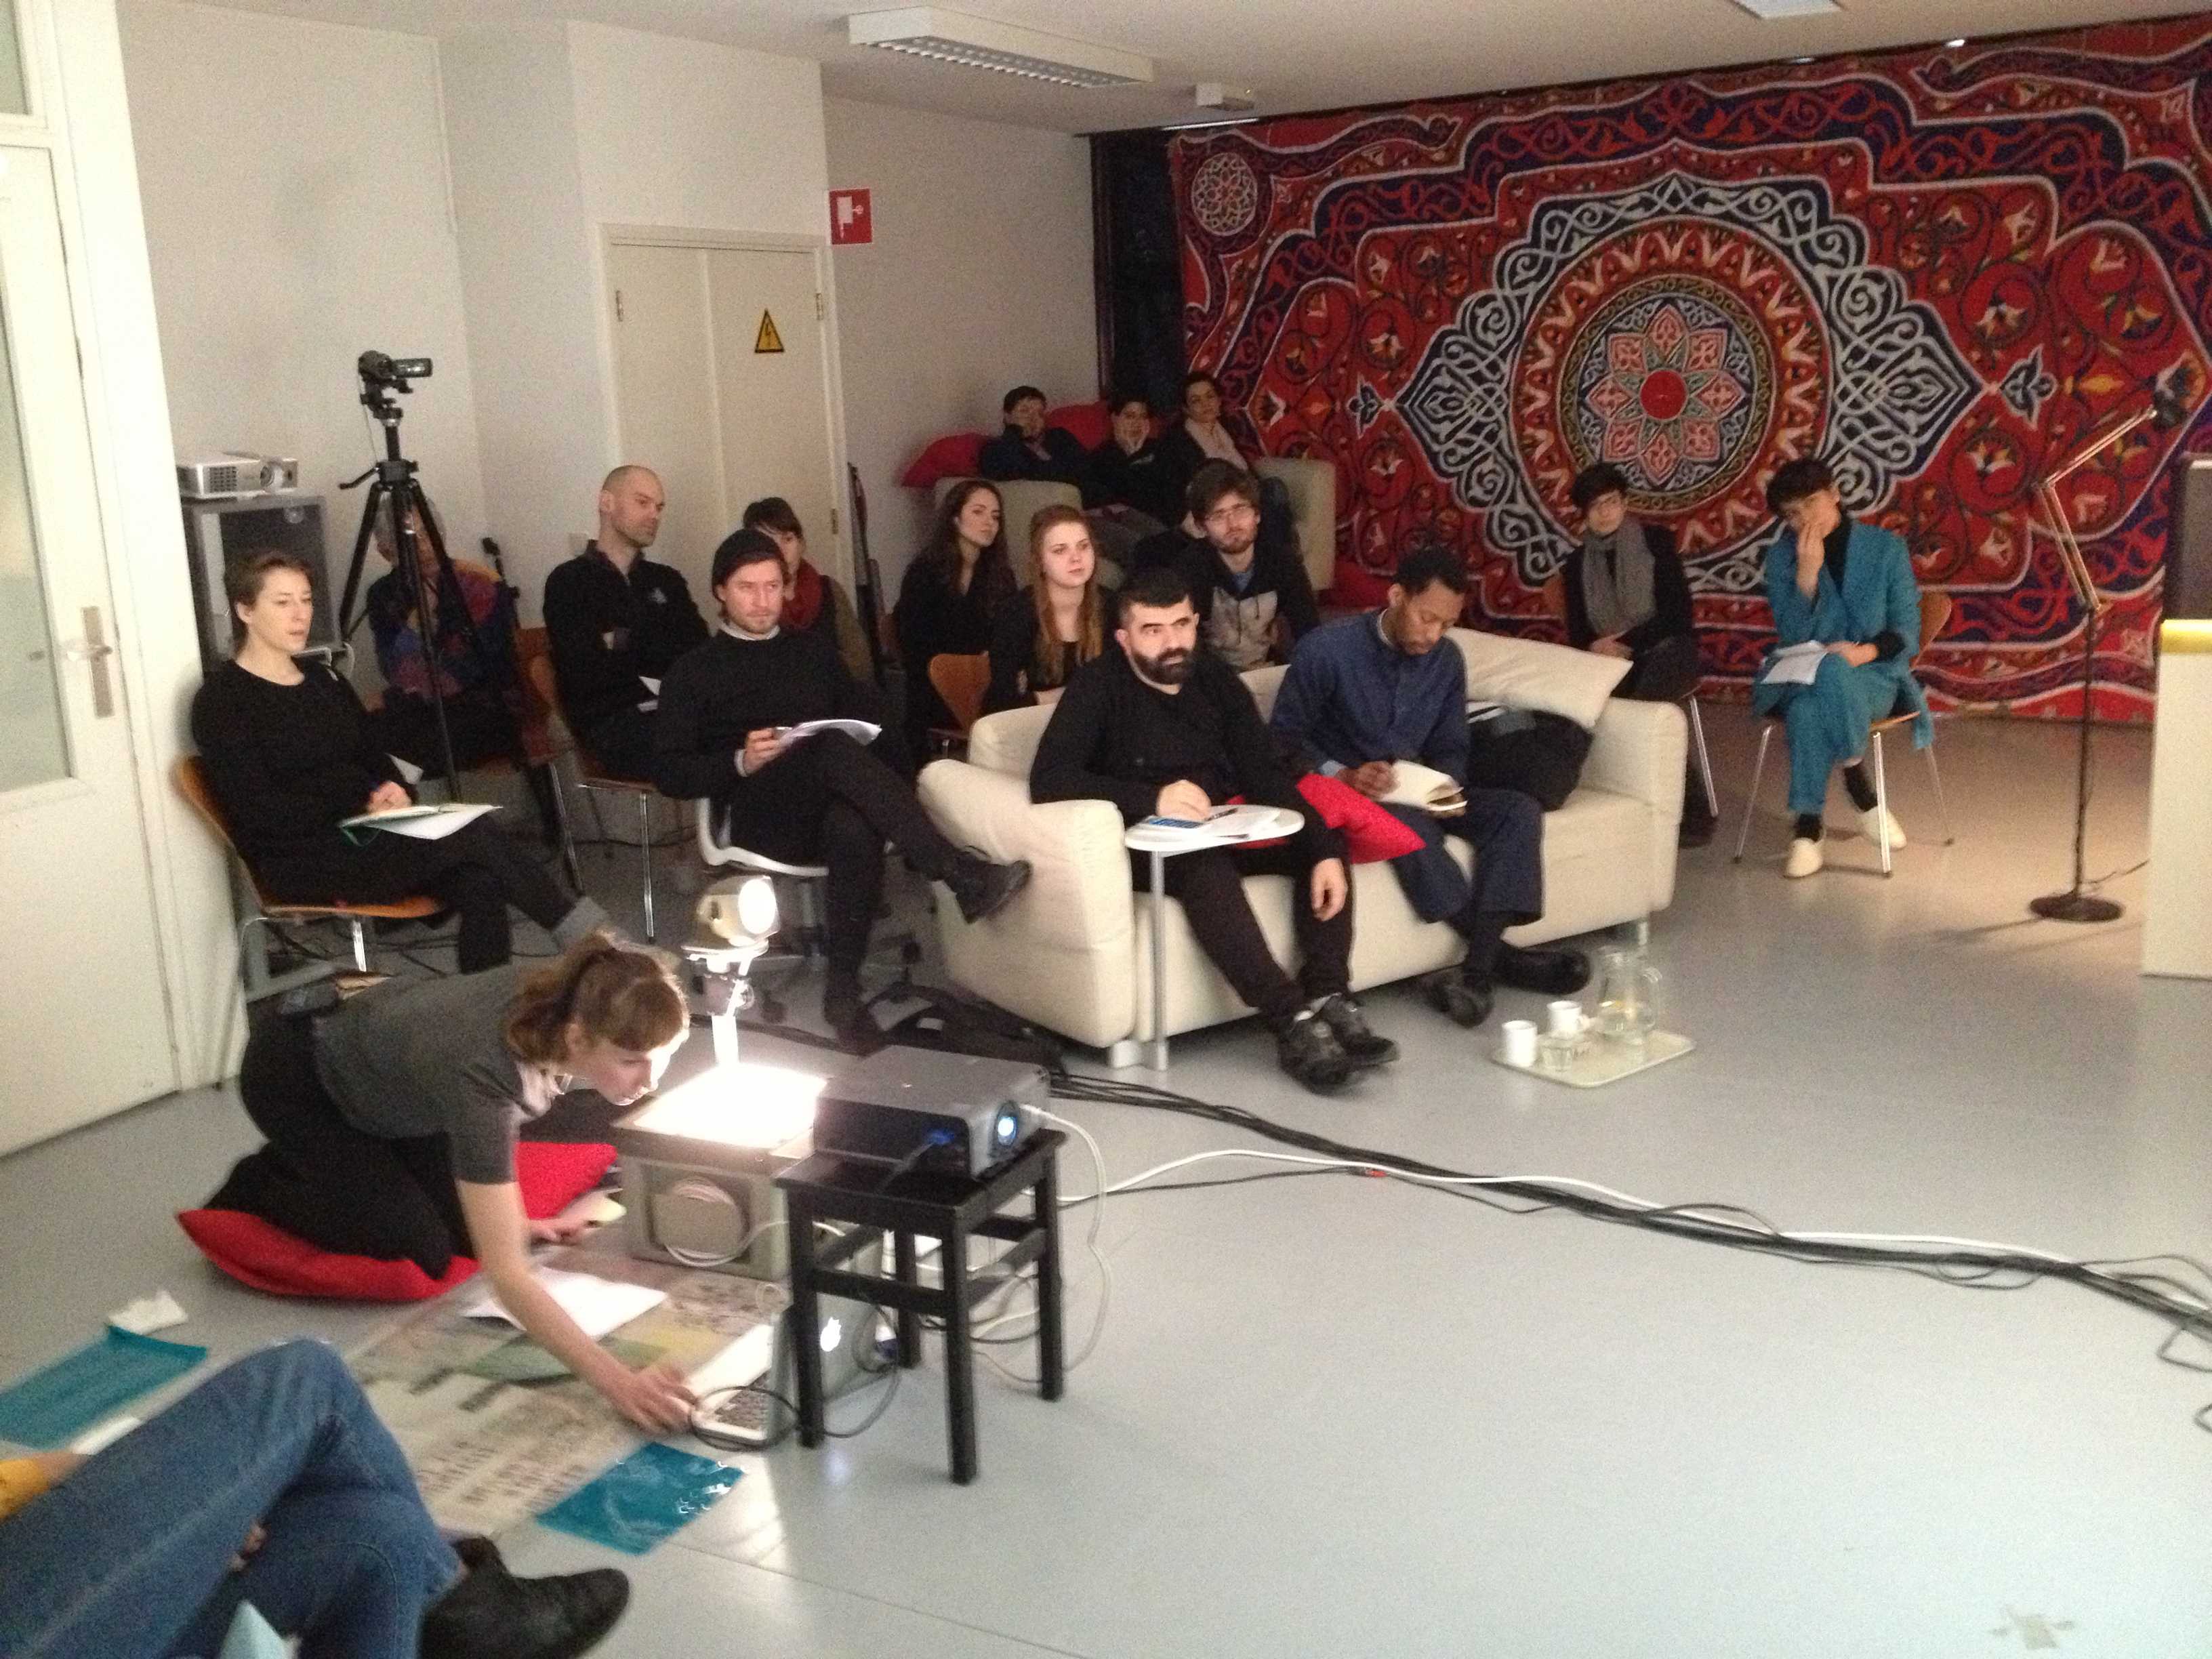  Lecture-performance Bryony Gillard, 2015. Respondents (on the white couch): Christian Nyampeta (right)and Mohammad Salemy (left), in the background Snejanka Mihaylova (wearing a blue suit).